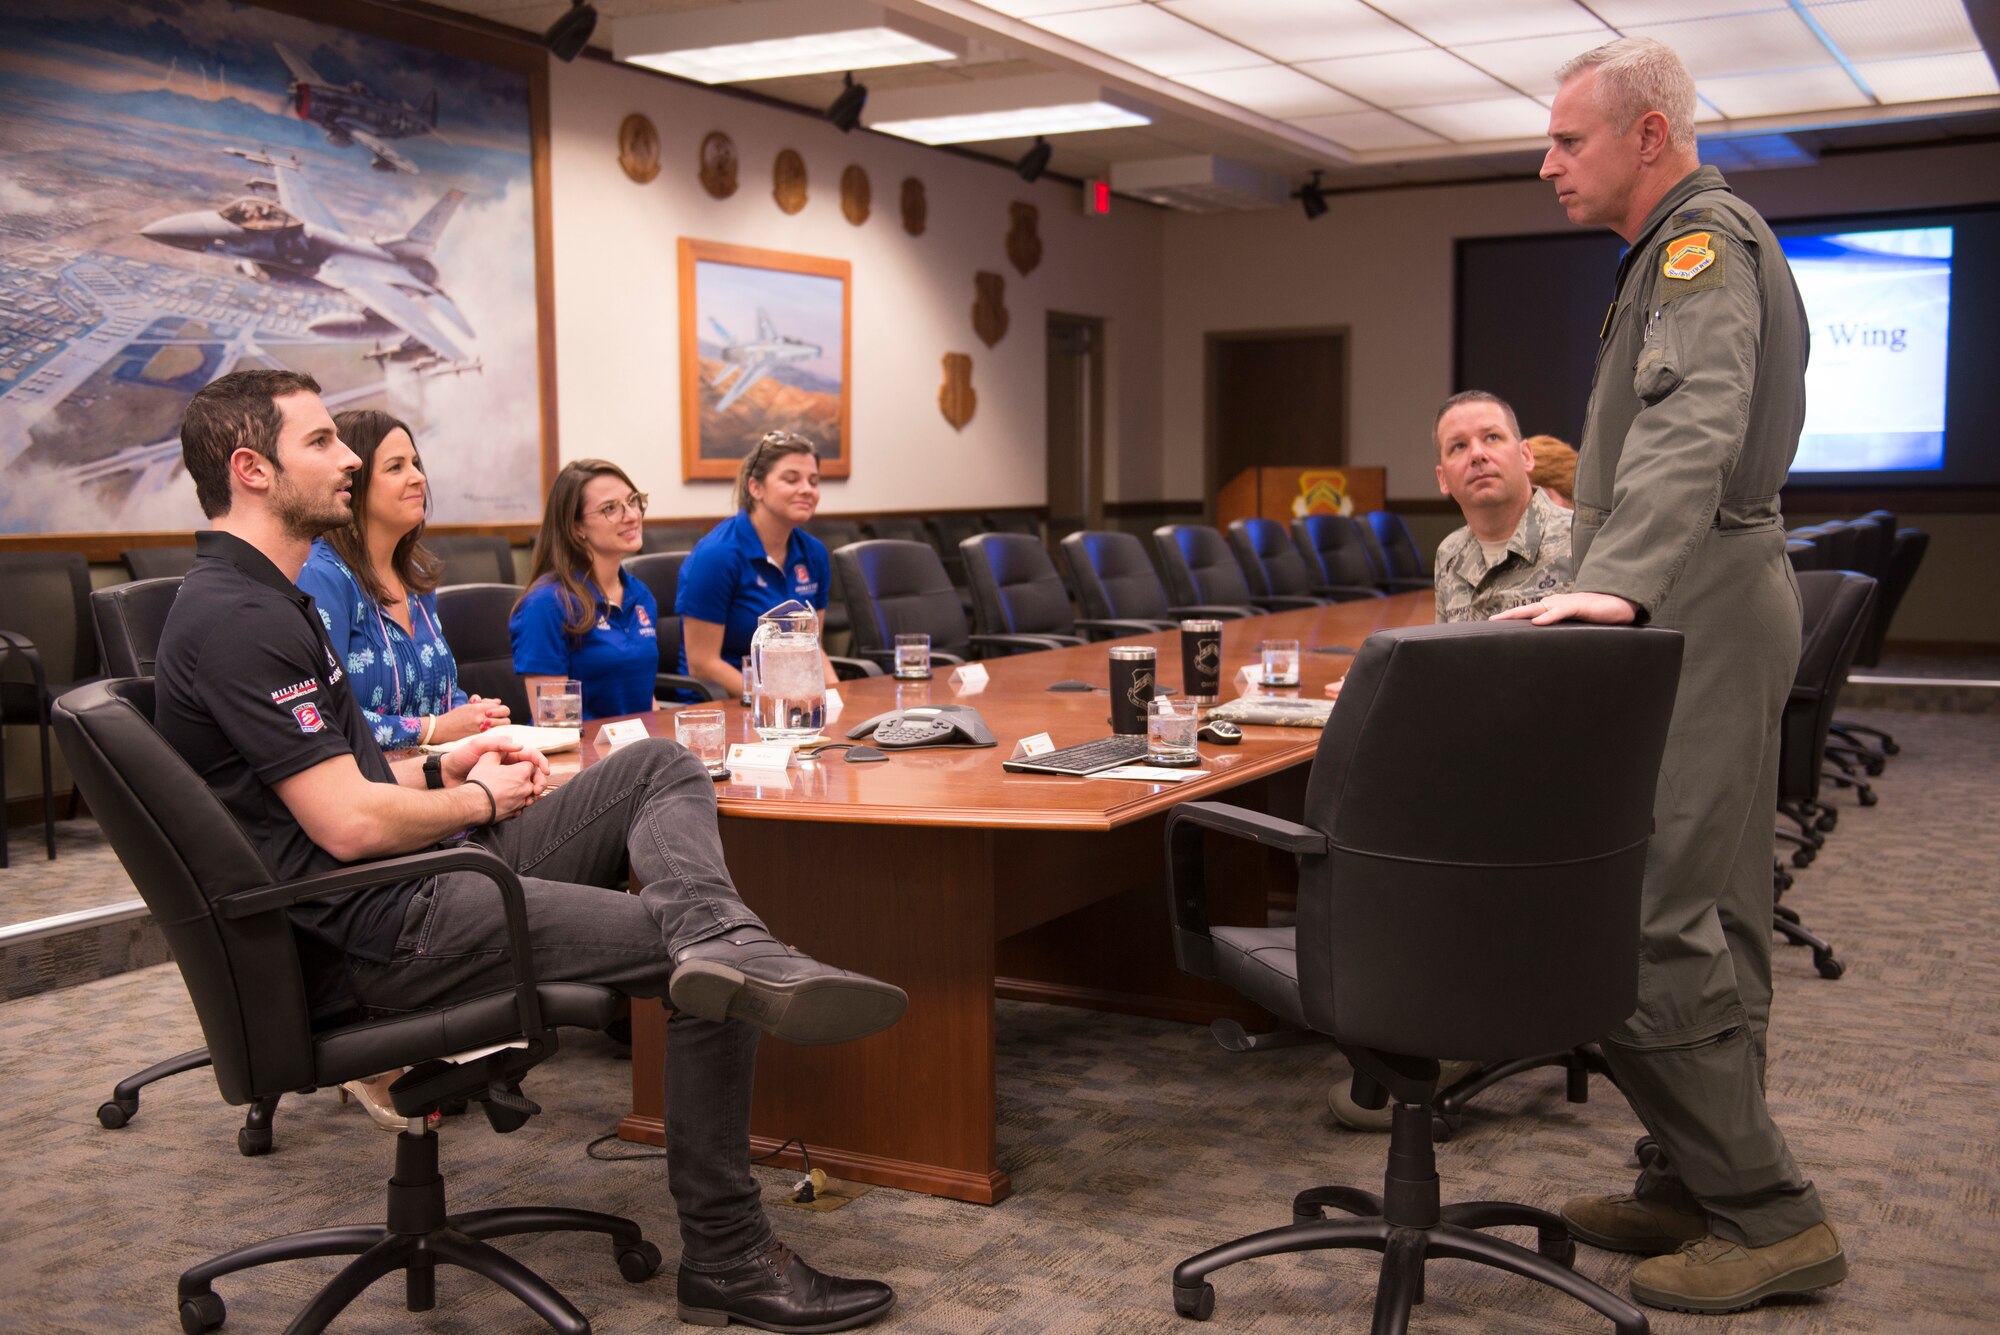 Col. Michael Richardson, 56th Fighter Wing vice commander, briefs members of the Andretti Autosport team on the wing mission at Luke Air Force Base, Ariz., April 5, 2018. The team toured the base and greeted Airmen. (U.S. Air Force photo by Senior Airman Ridge Shan)